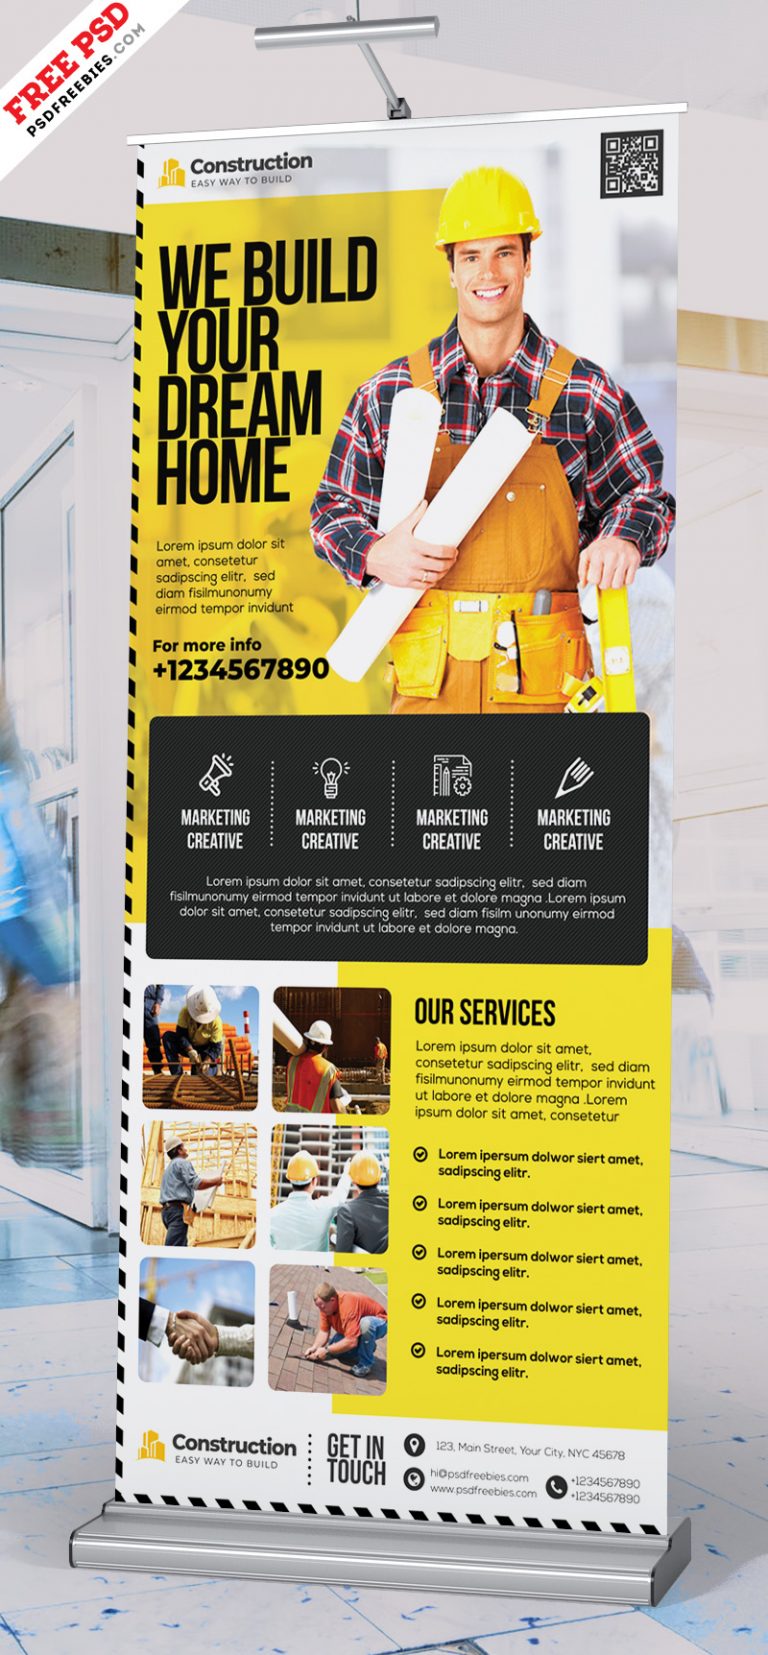 Construction Company Roll-up Banner Design PSD | PSDFreebies.com